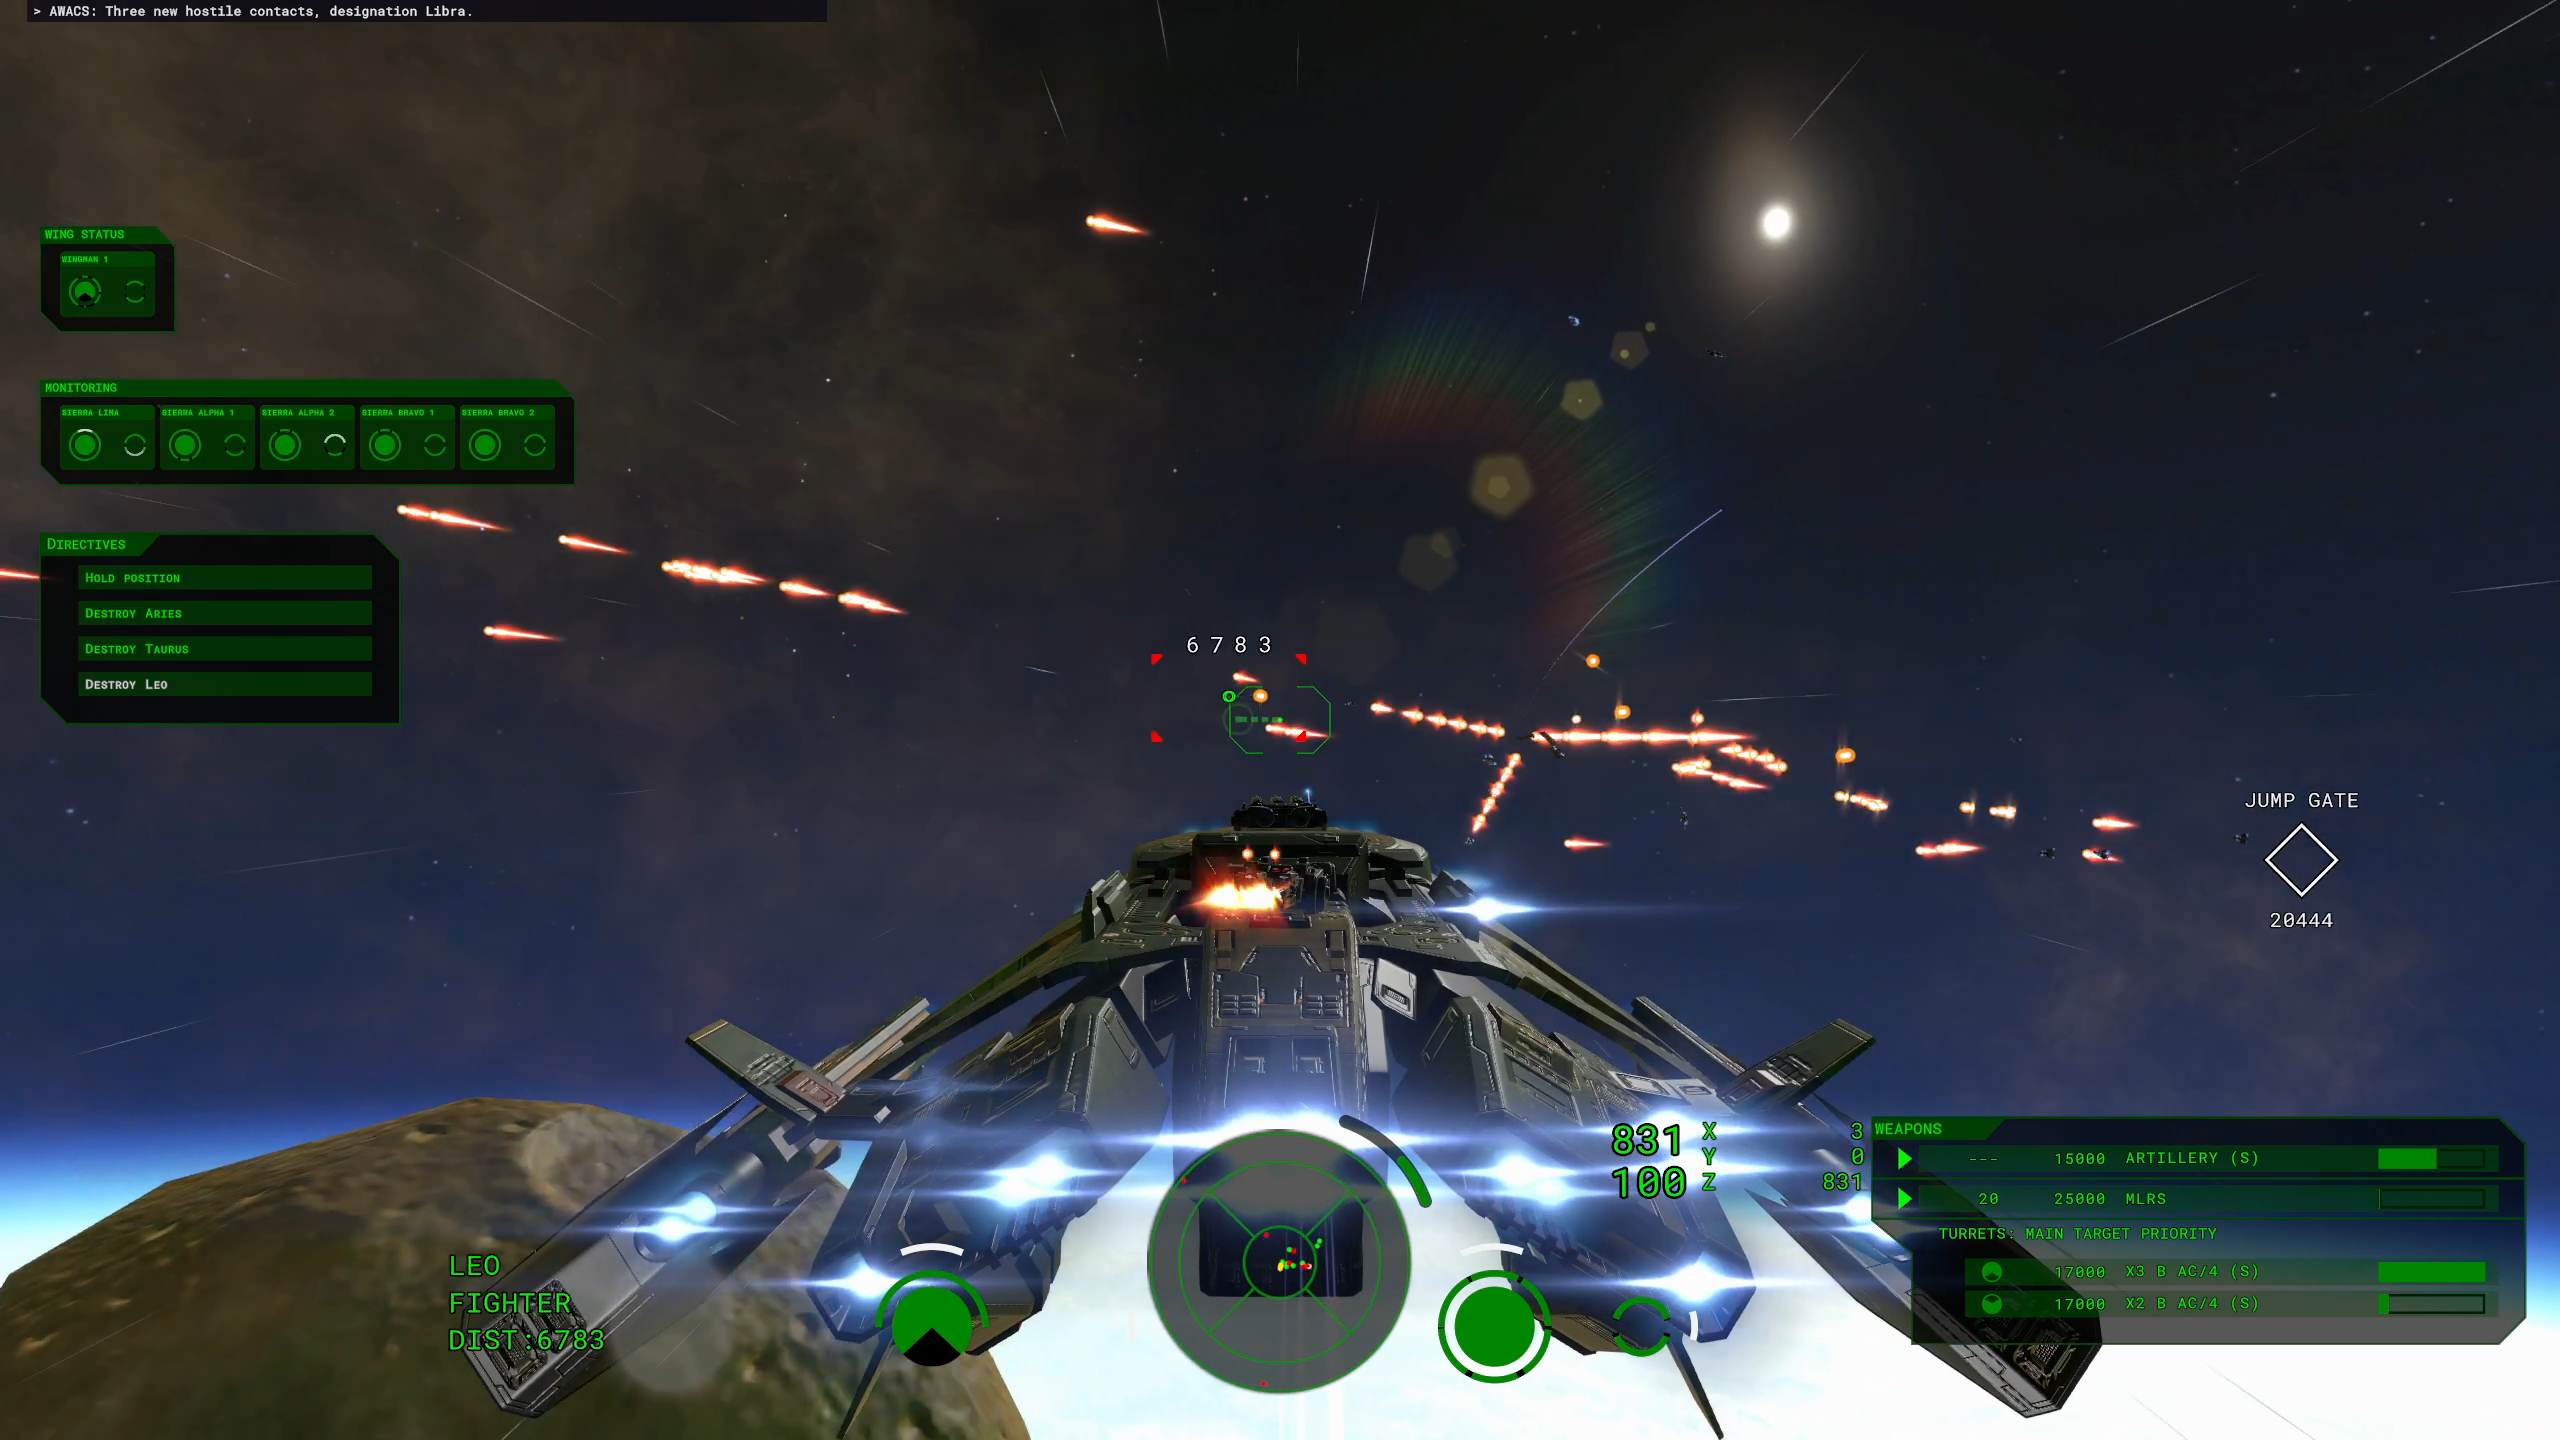 The player emerges from an asteroid field will the main battle rages on in the distance with visible weapons fire on both sides